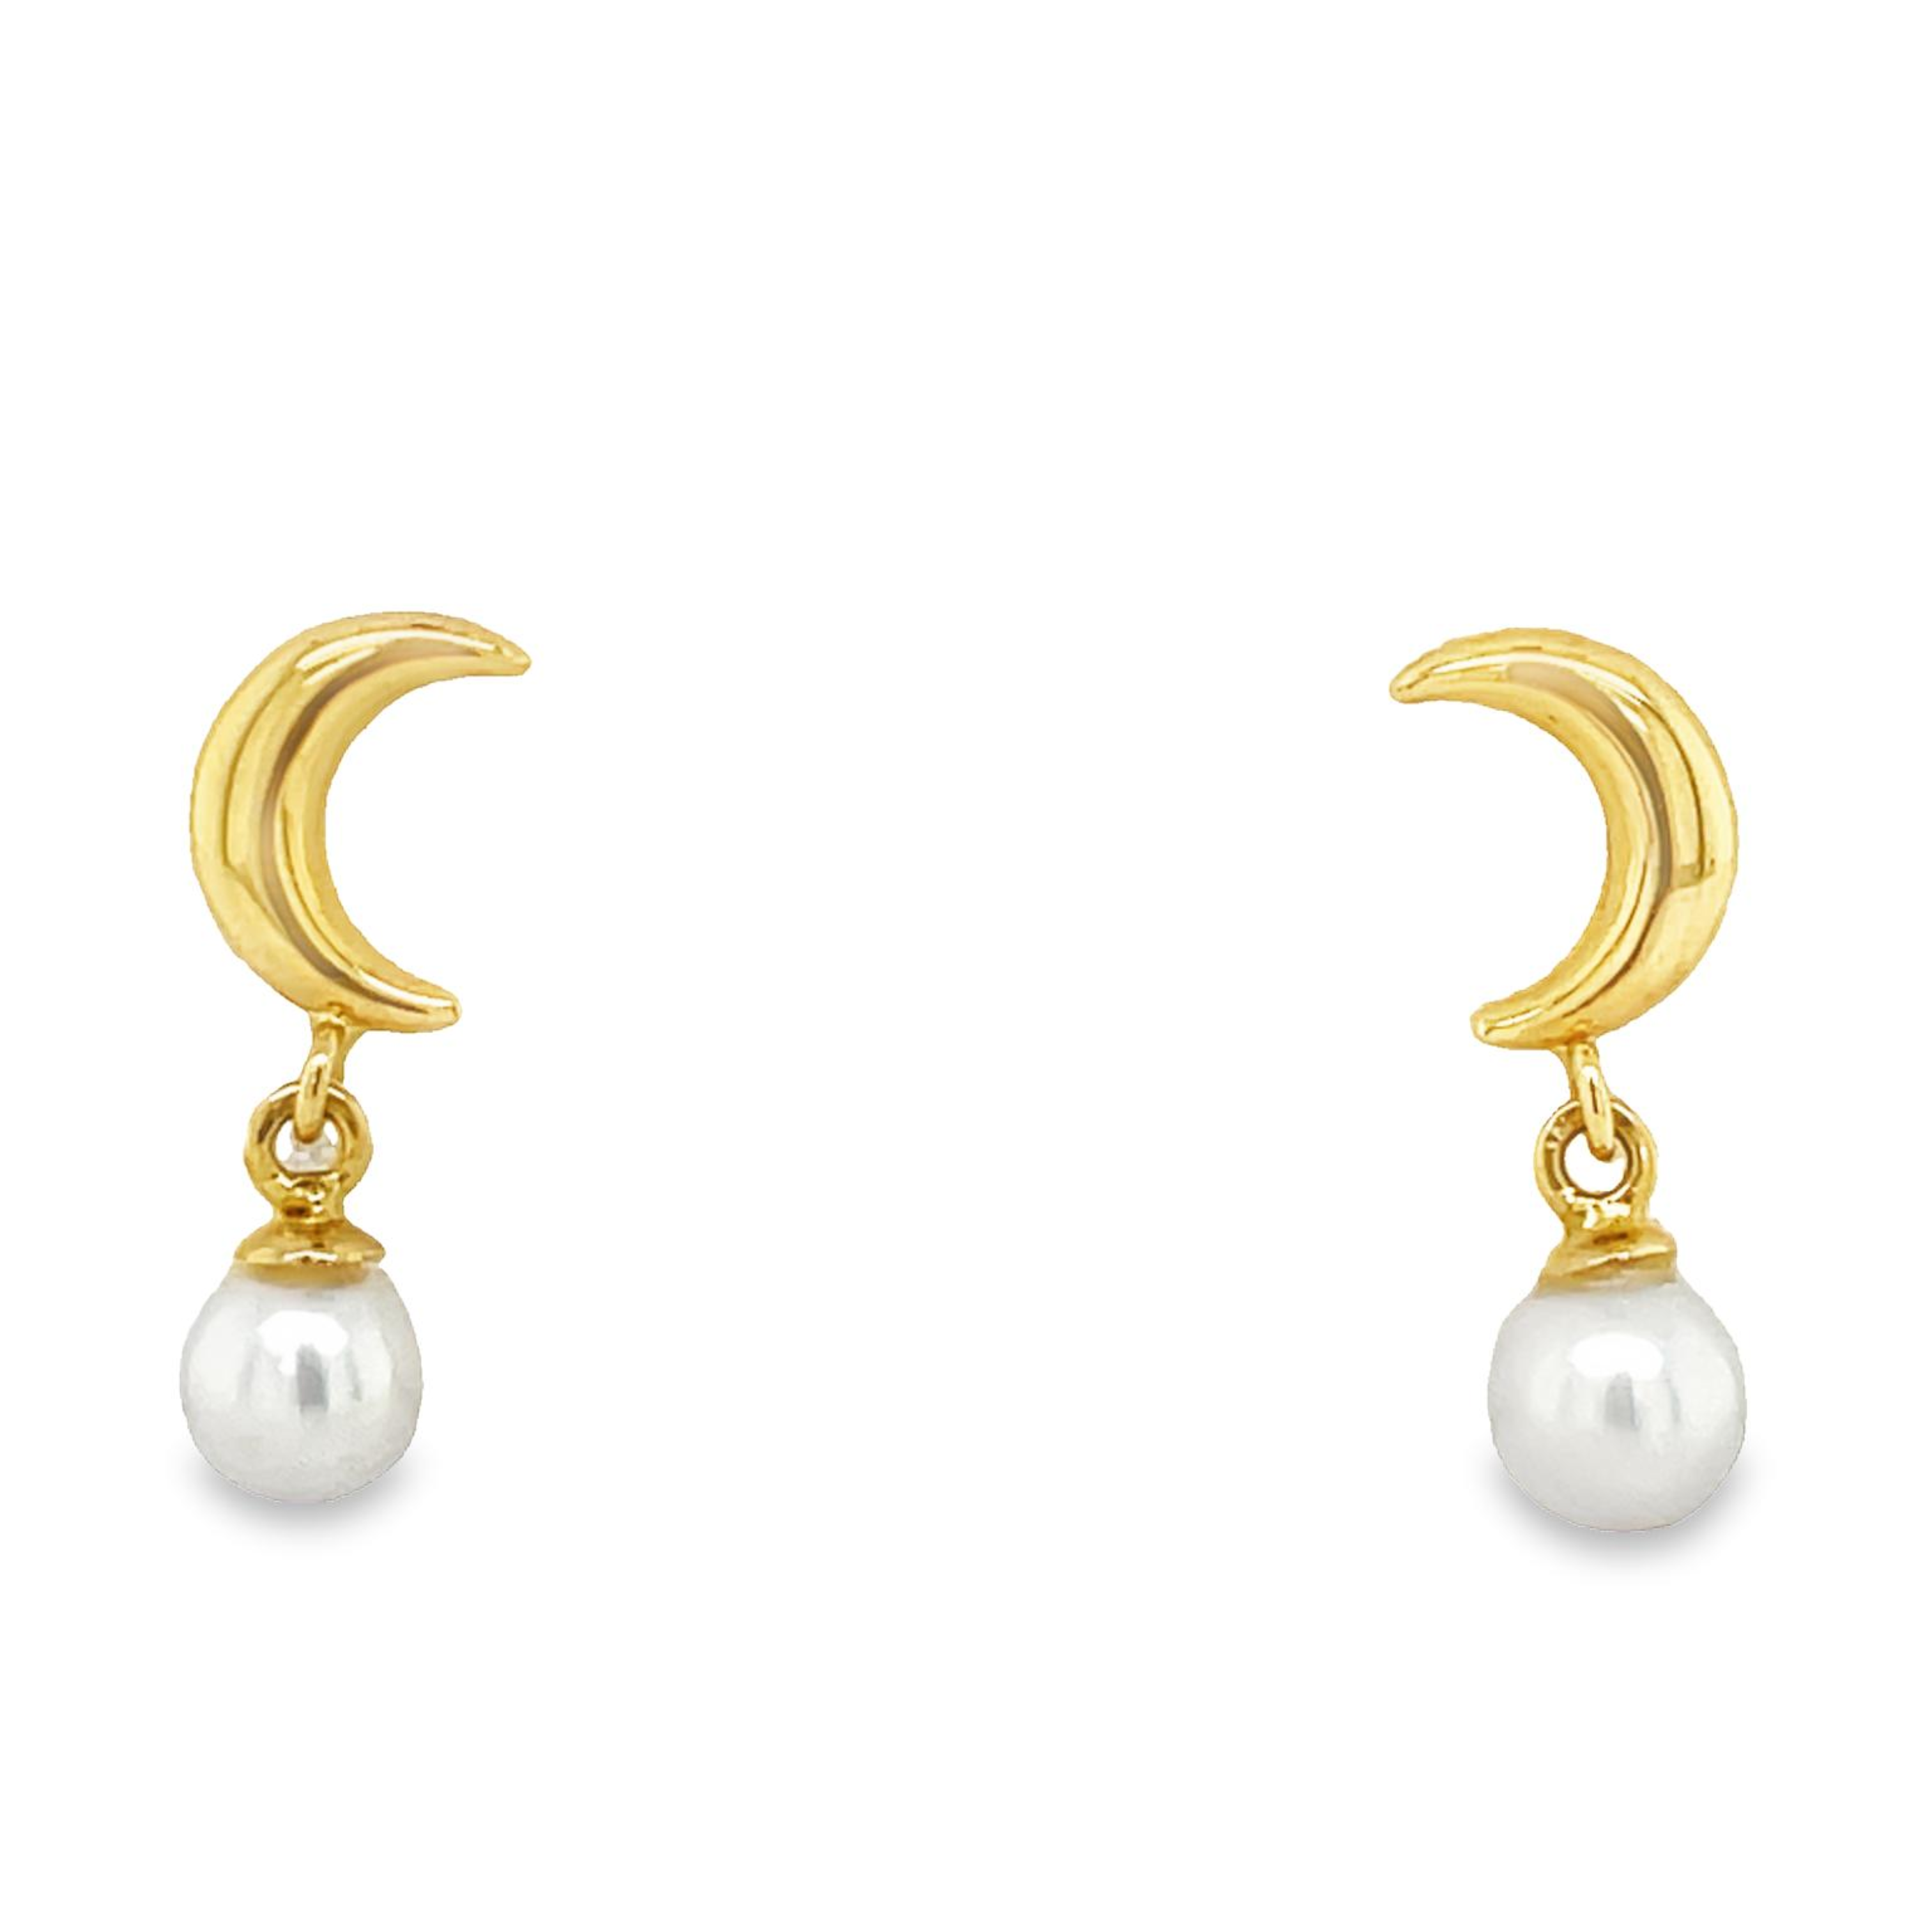 Securely crafted baby earrings in 14k yellow gold feature a crescent moon with a dangling pearl, perfect for any baby.